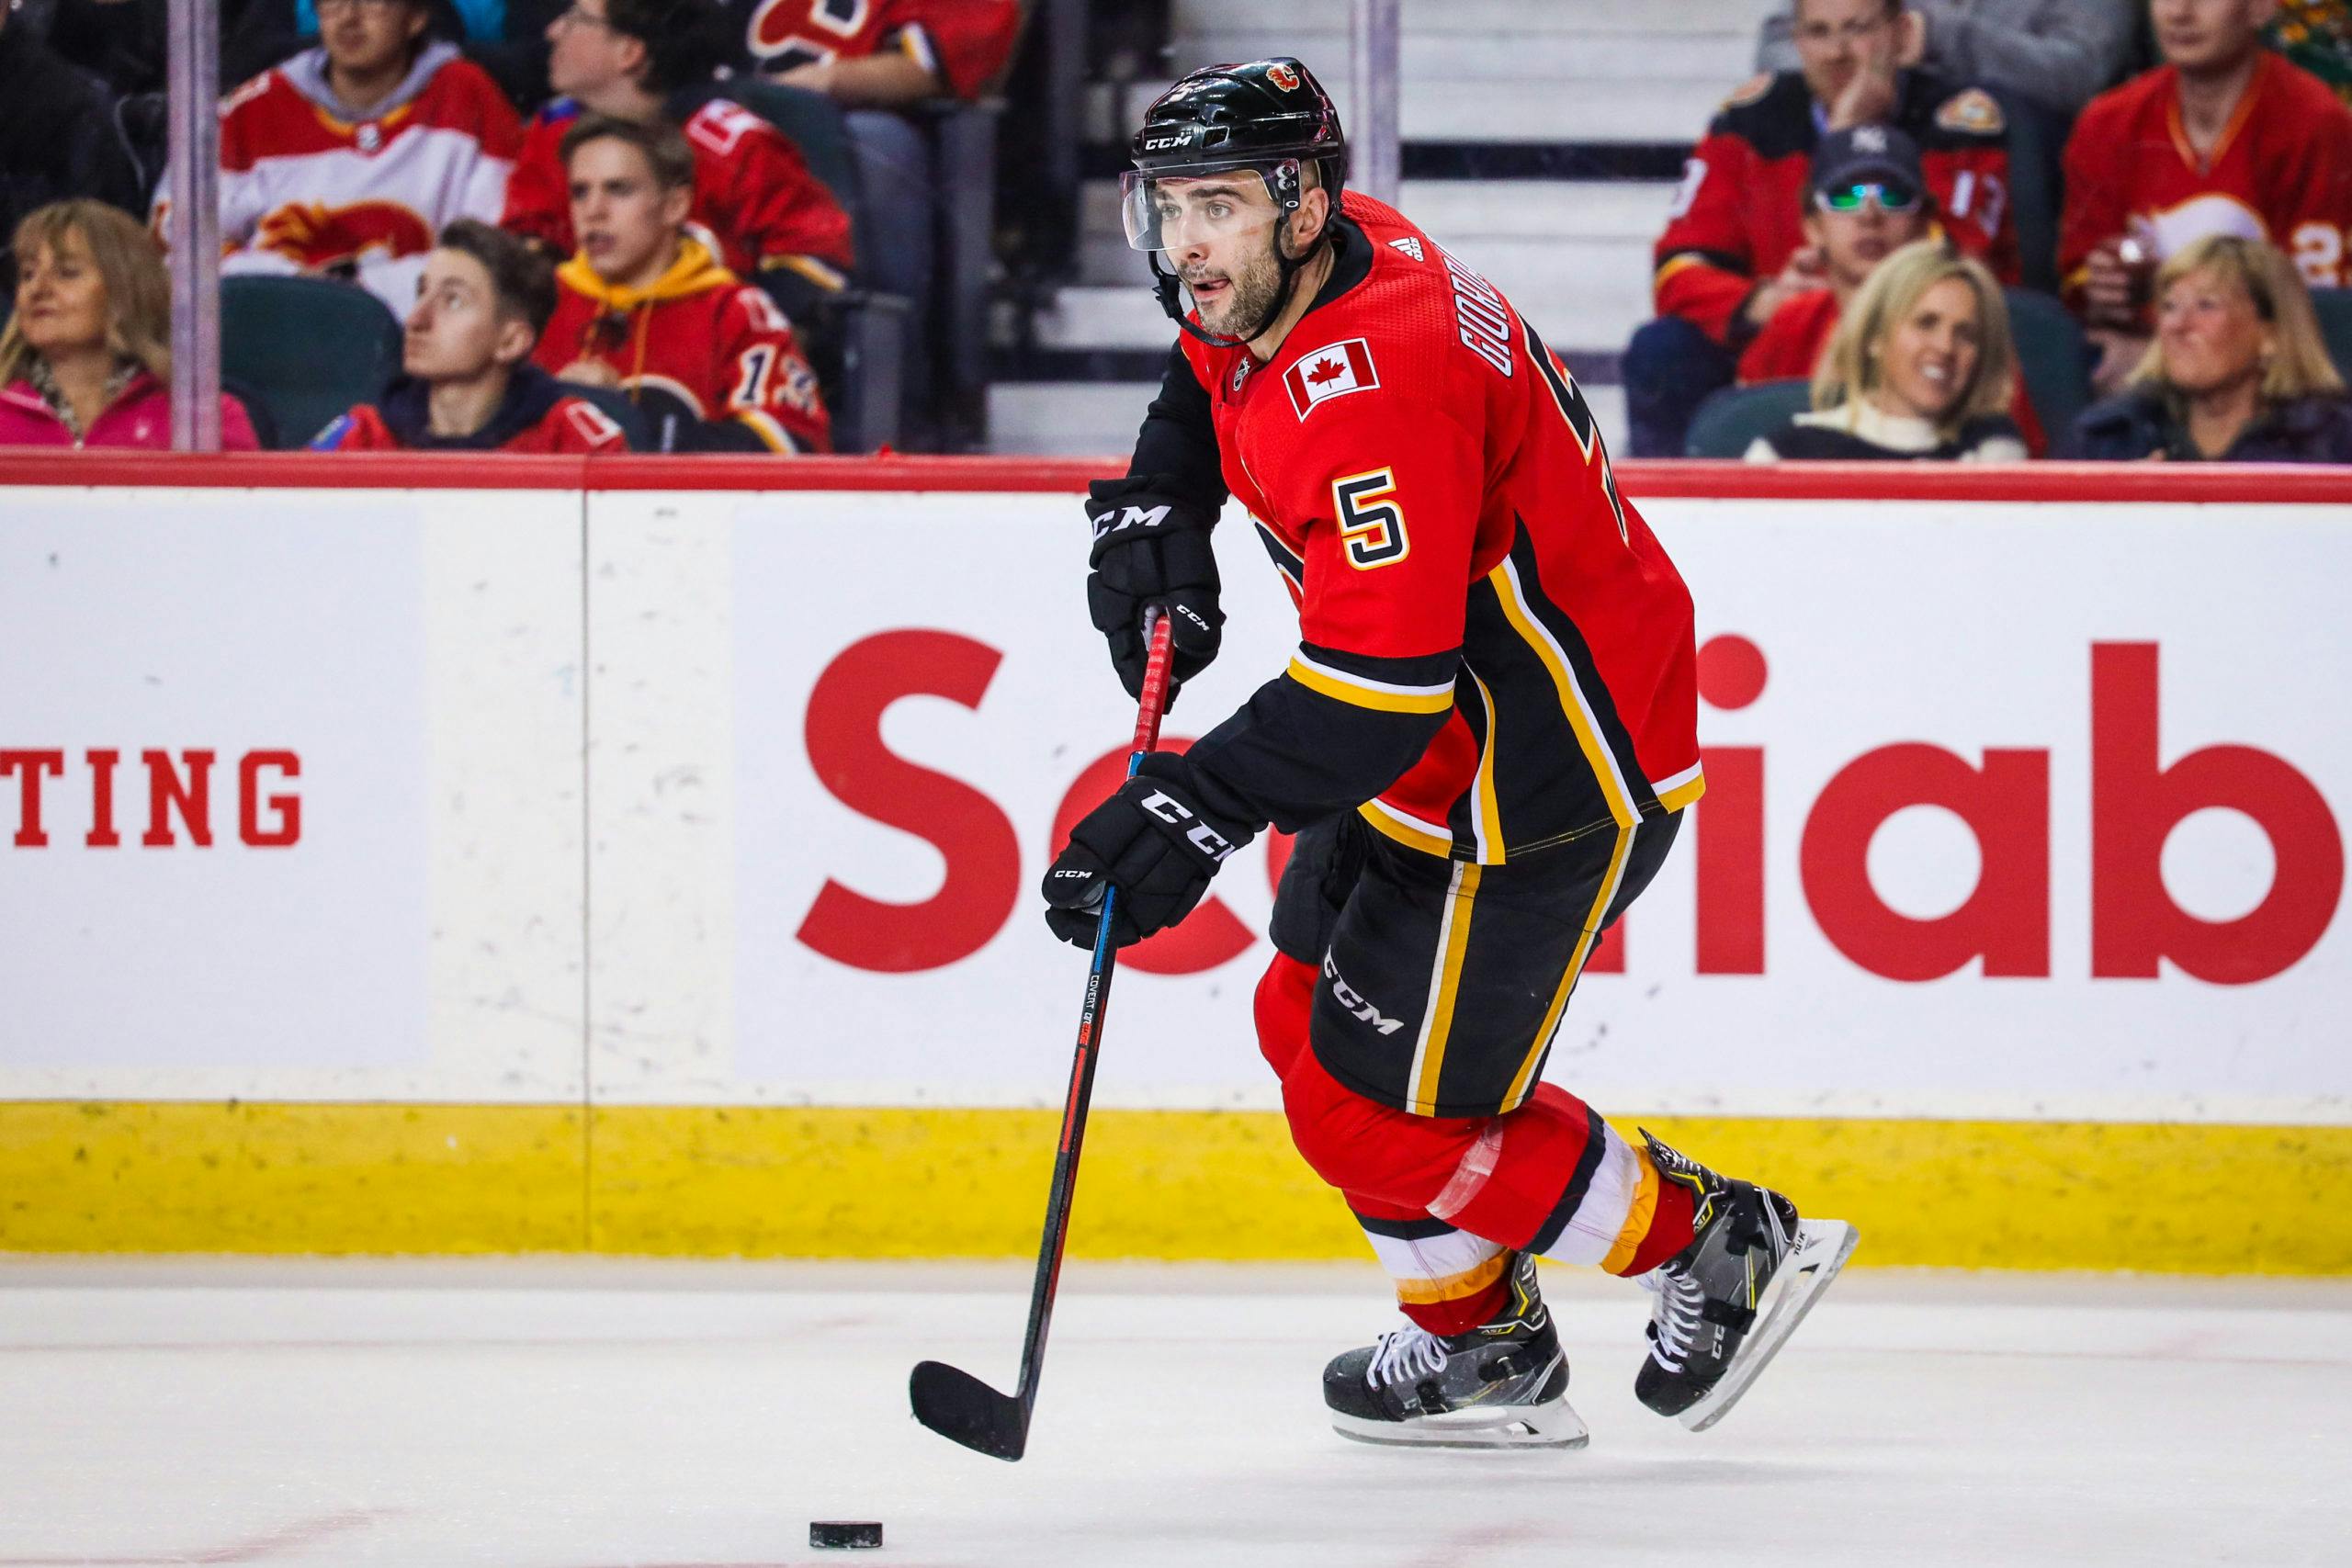 Ex-Flames captain Mark Giordano ready to face former team for